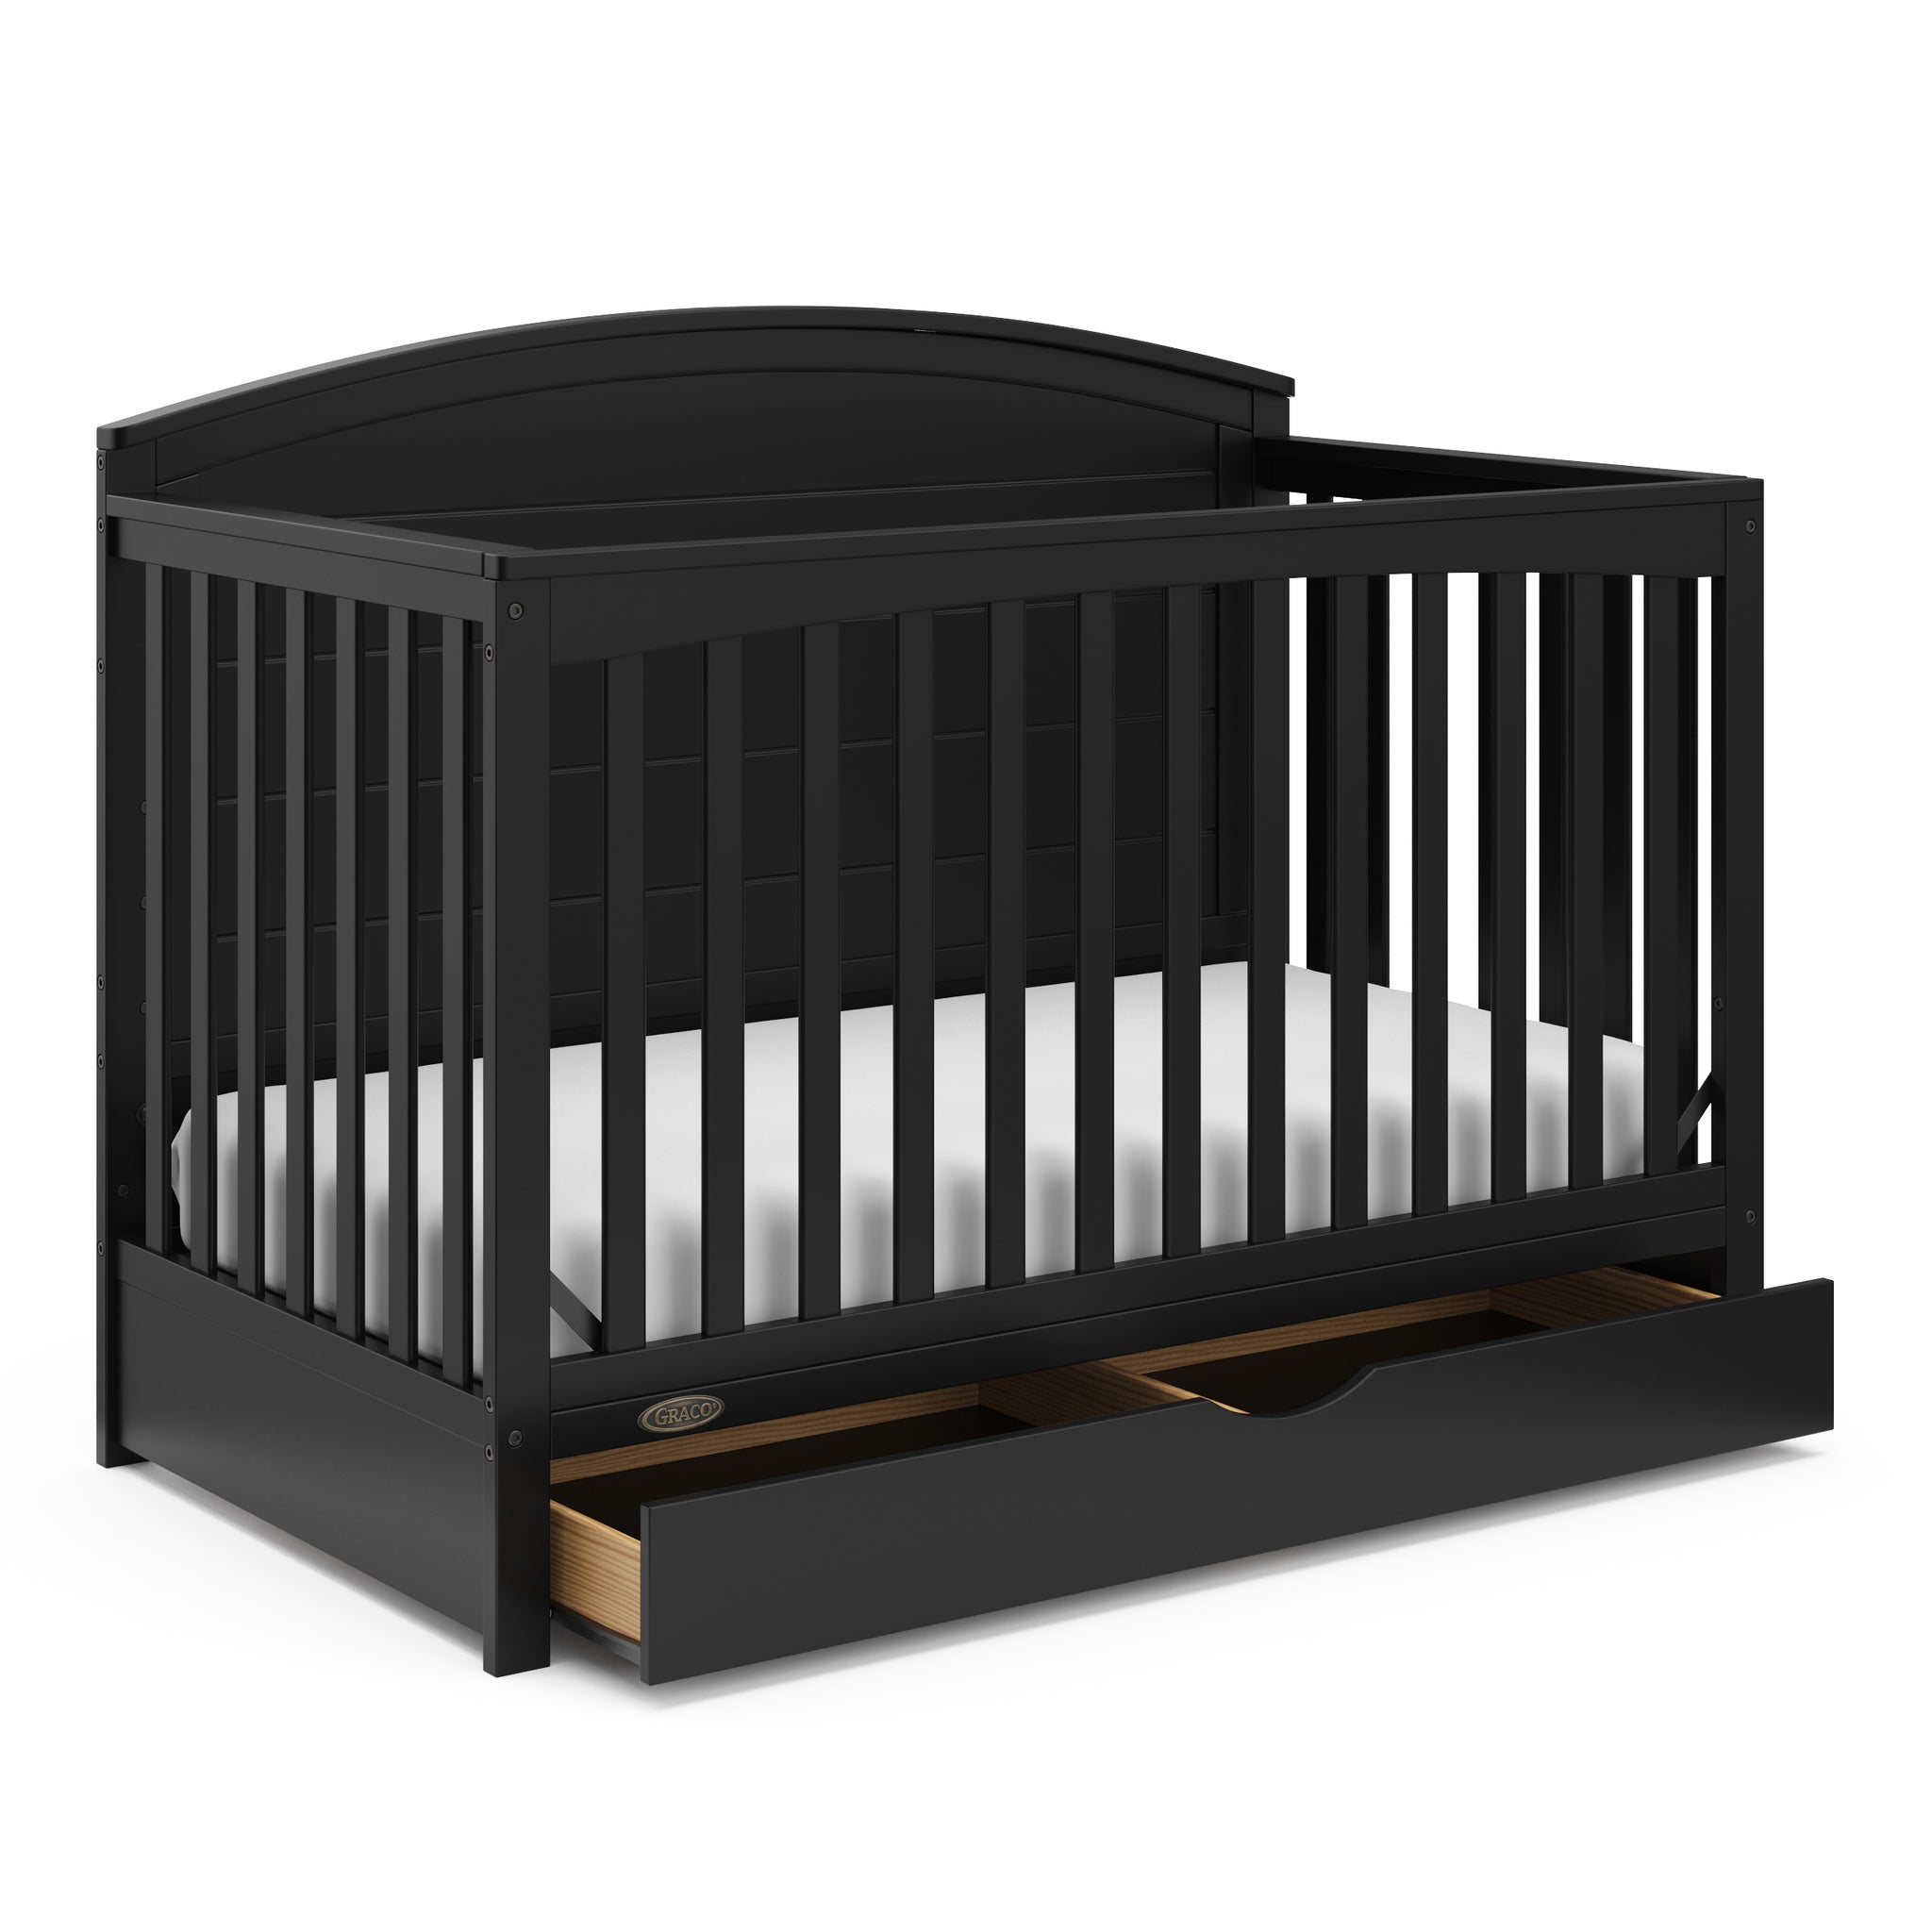 Convertible black crib with an open drawer, viewed from an angle